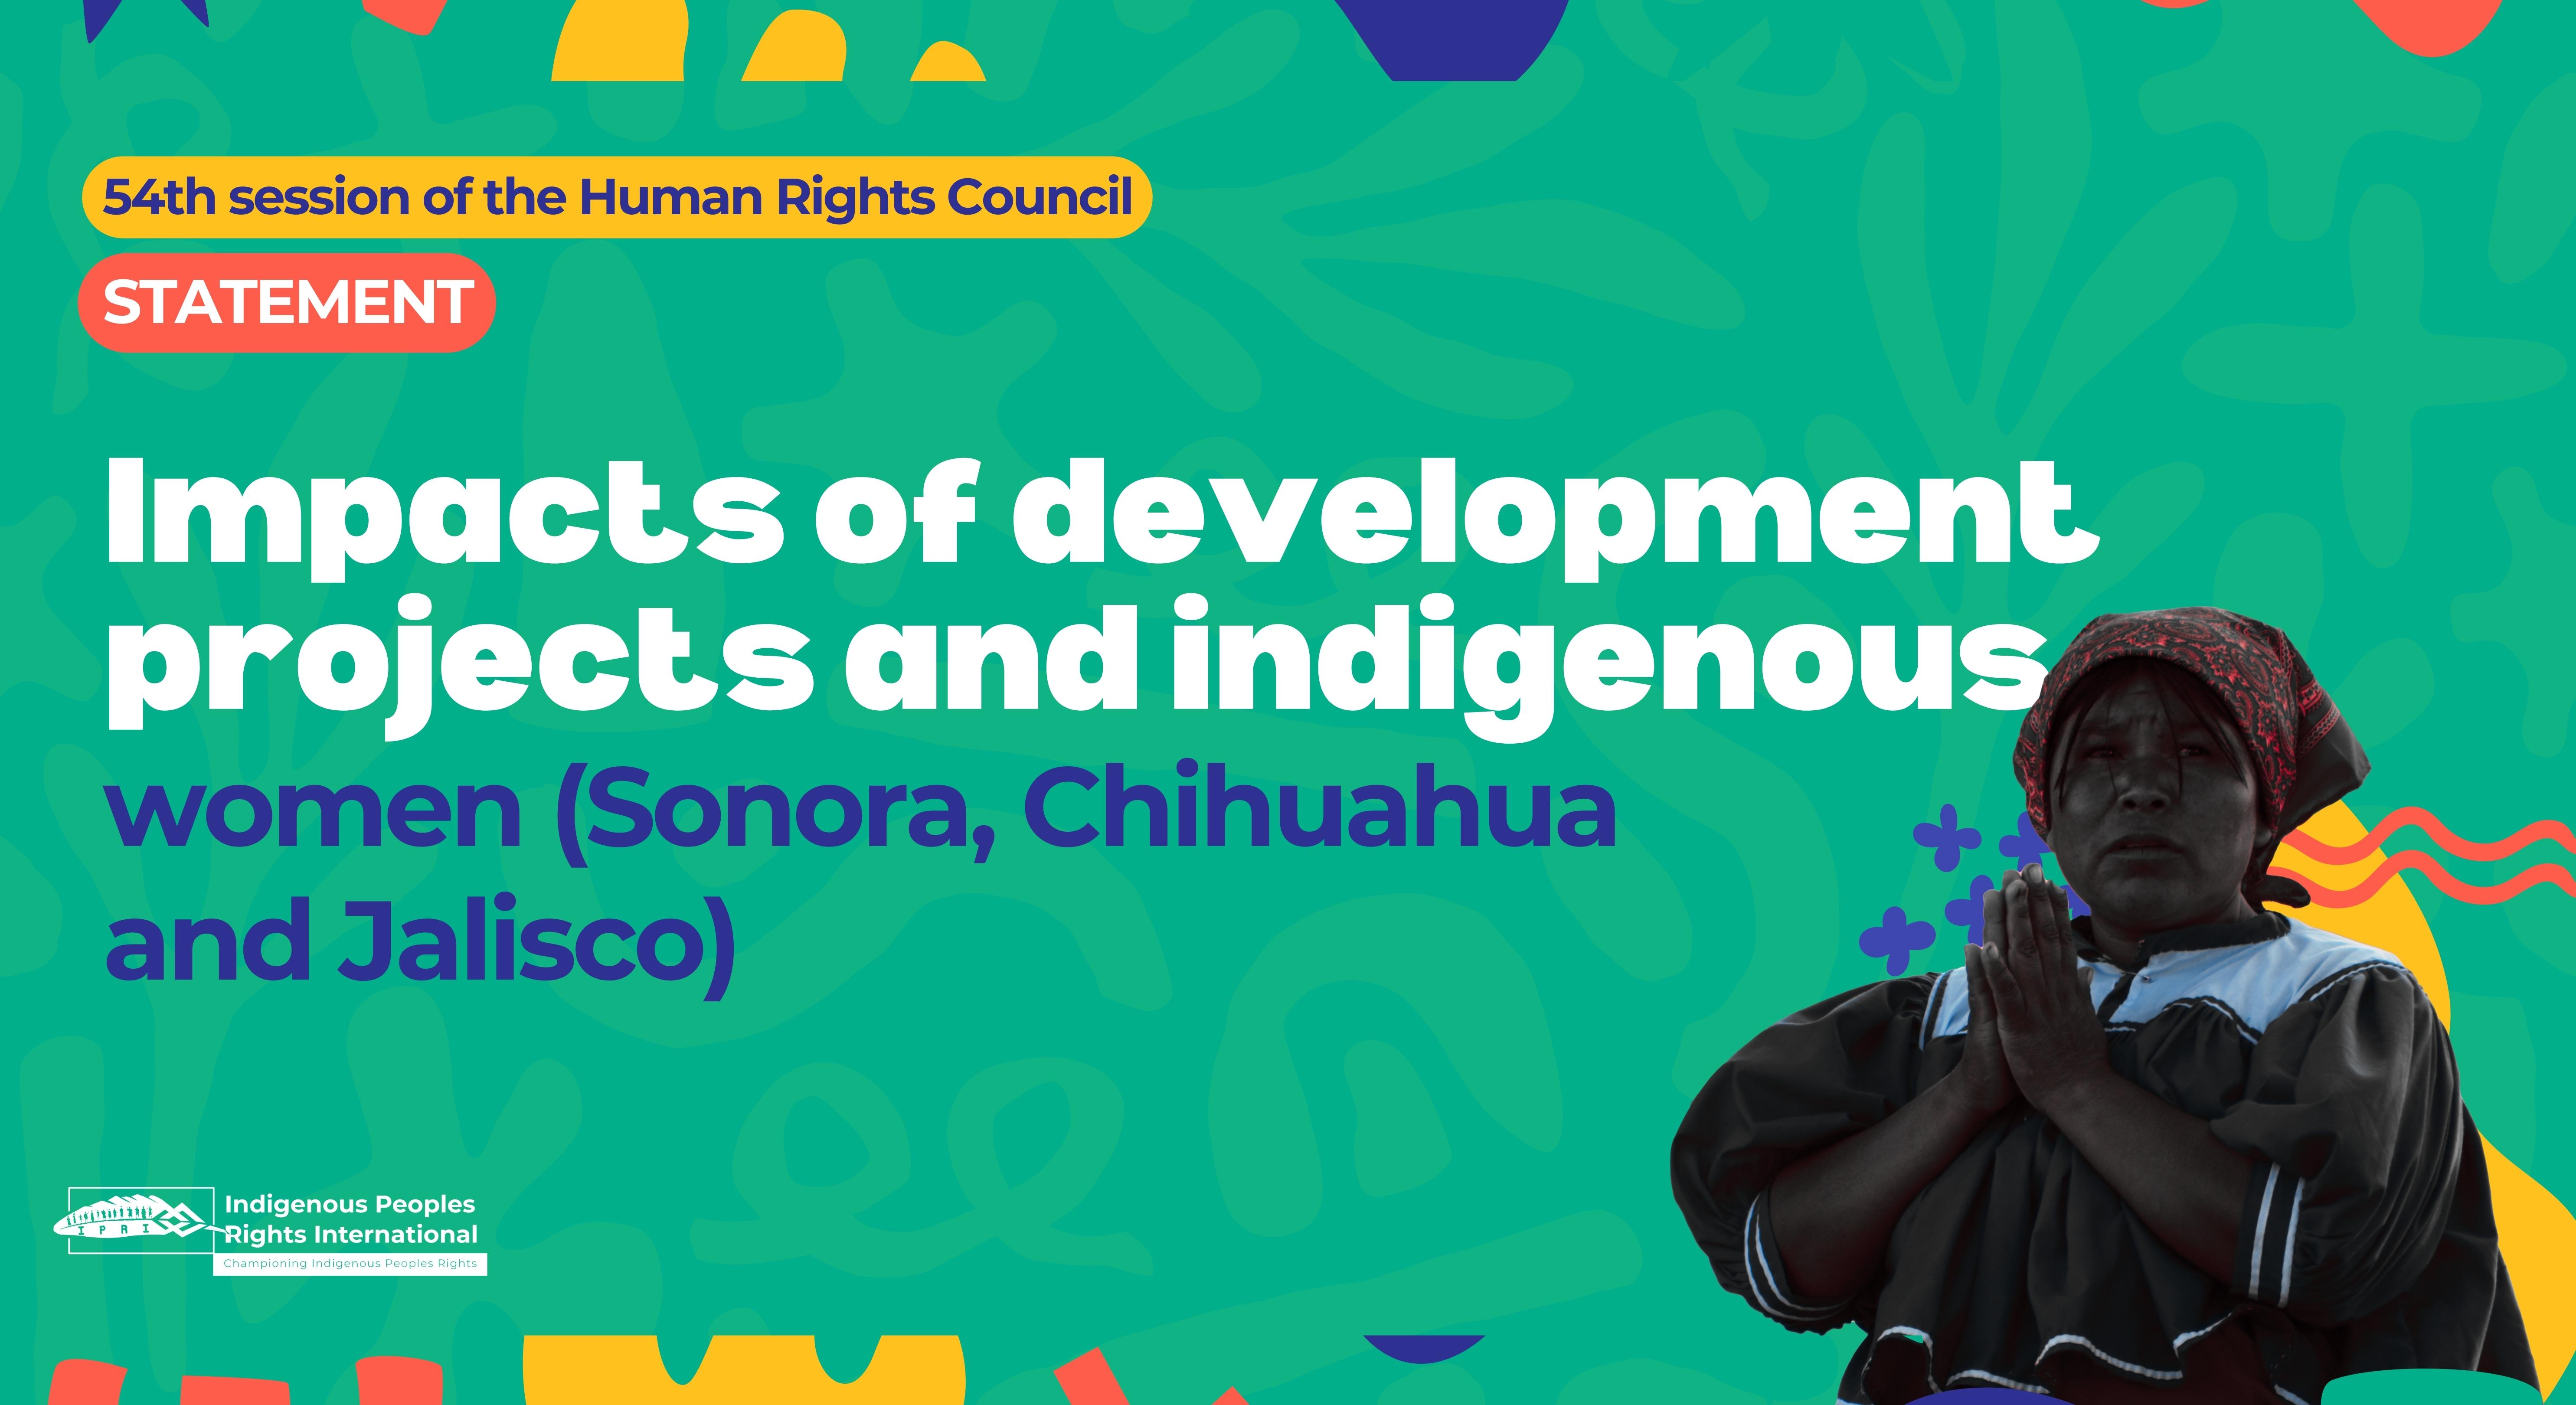 #HRC54 Impacts of development projects and indigenous women (Sonora, Chihuahua and Jalisco)